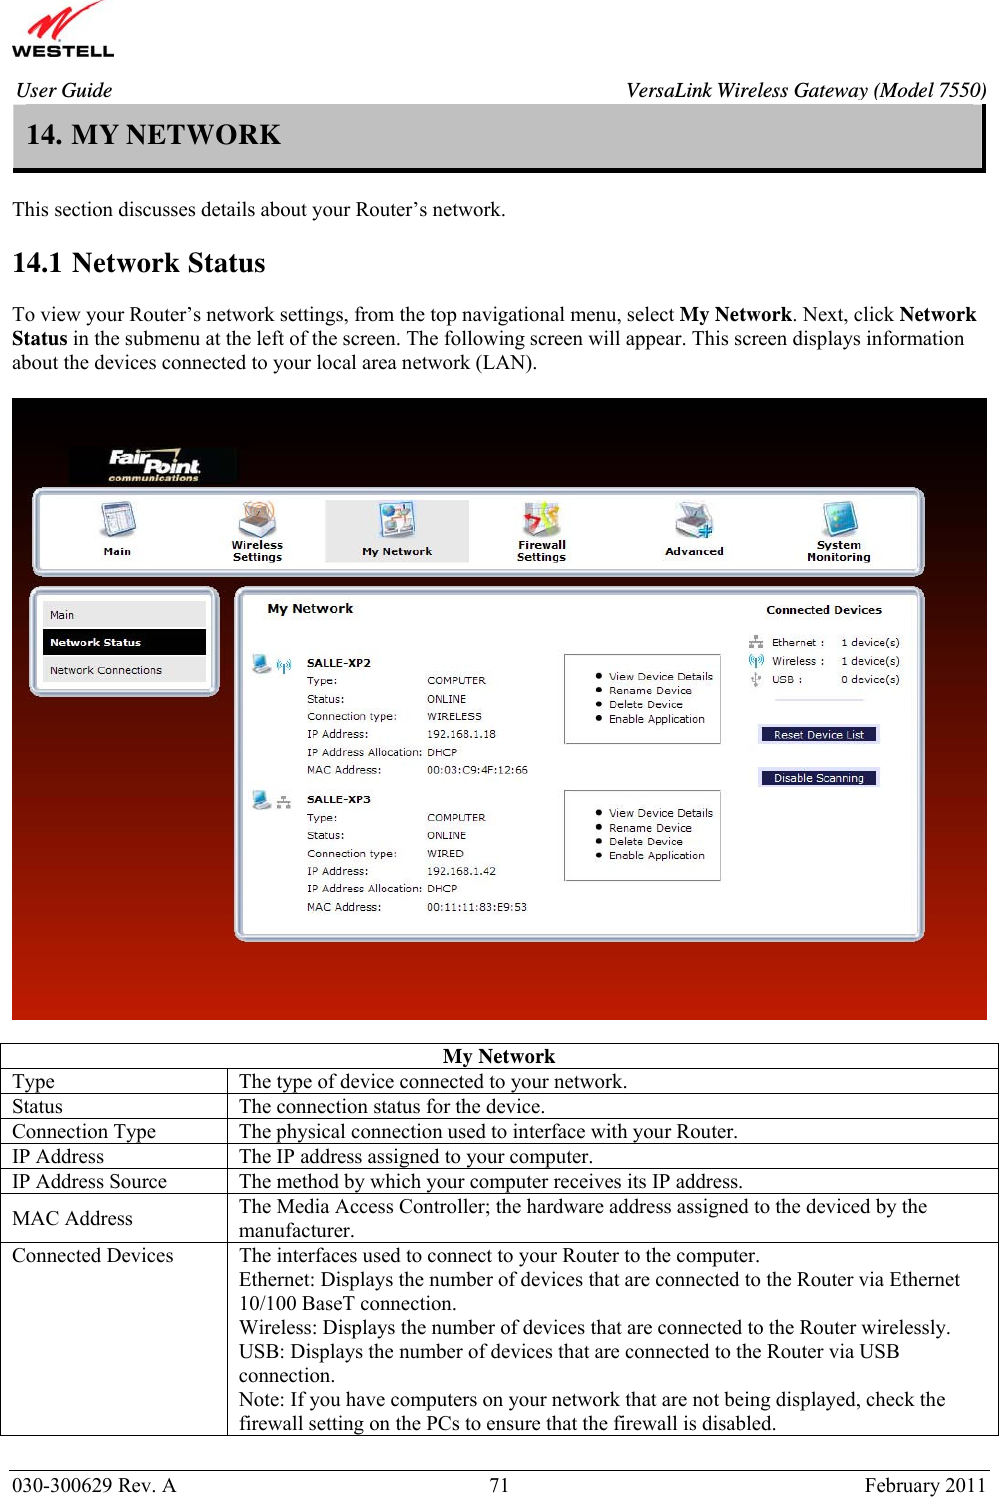       030-300629 Rev. A  71       February 2011 User Guide  VersaLink Wireless Gateway (Model 7550)14. MY NETWORK  This section discusses details about your Router’s network.  14.1 Network Status  To view your Router’s network settings, from the top navigational menu, select My Network. Next, click Network Status in the submenu at the left of the screen. The following screen will appear. This screen displays information about the devices connected to your local area network (LAN).     My Network Type  The type of device connected to your network. Status  The connection status for the device. Connection Type  The physical connection used to interface with your Router. IP Address   The IP address assigned to your computer. IP Address Source  The method by which your computer receives its IP address. MAC Address  The Media Access Controller; the hardware address assigned to the deviced by the manufacturer.  Connected Devices  The interfaces used to connect to your Router to the computer. Ethernet: Displays the number of devices that are connected to the Router via Ethernet 10/100 BaseT connection. Wireless: Displays the number of devices that are connected to the Router wirelessly. USB: Displays the number of devices that are connected to the Router via USB connection. Note: If you have computers on your network that are not being displayed, check the firewall setting on the PCs to ensure that the firewall is disabled.  